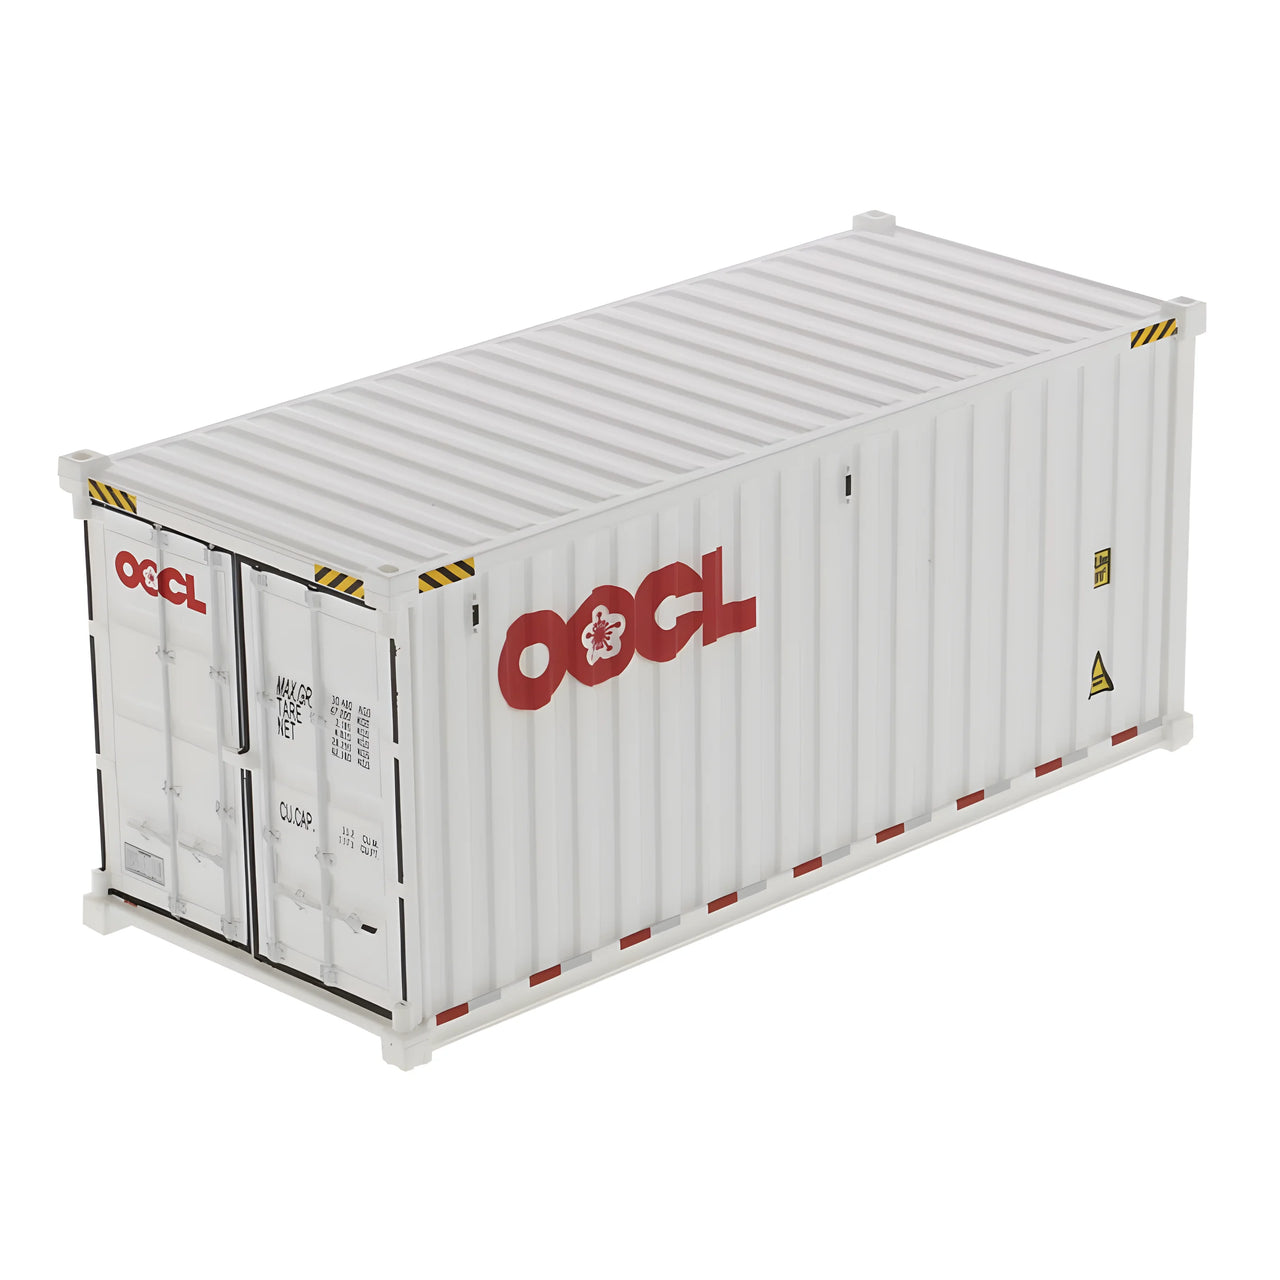 91025B 20' Dry Goods Sea Container 1:50 Scale